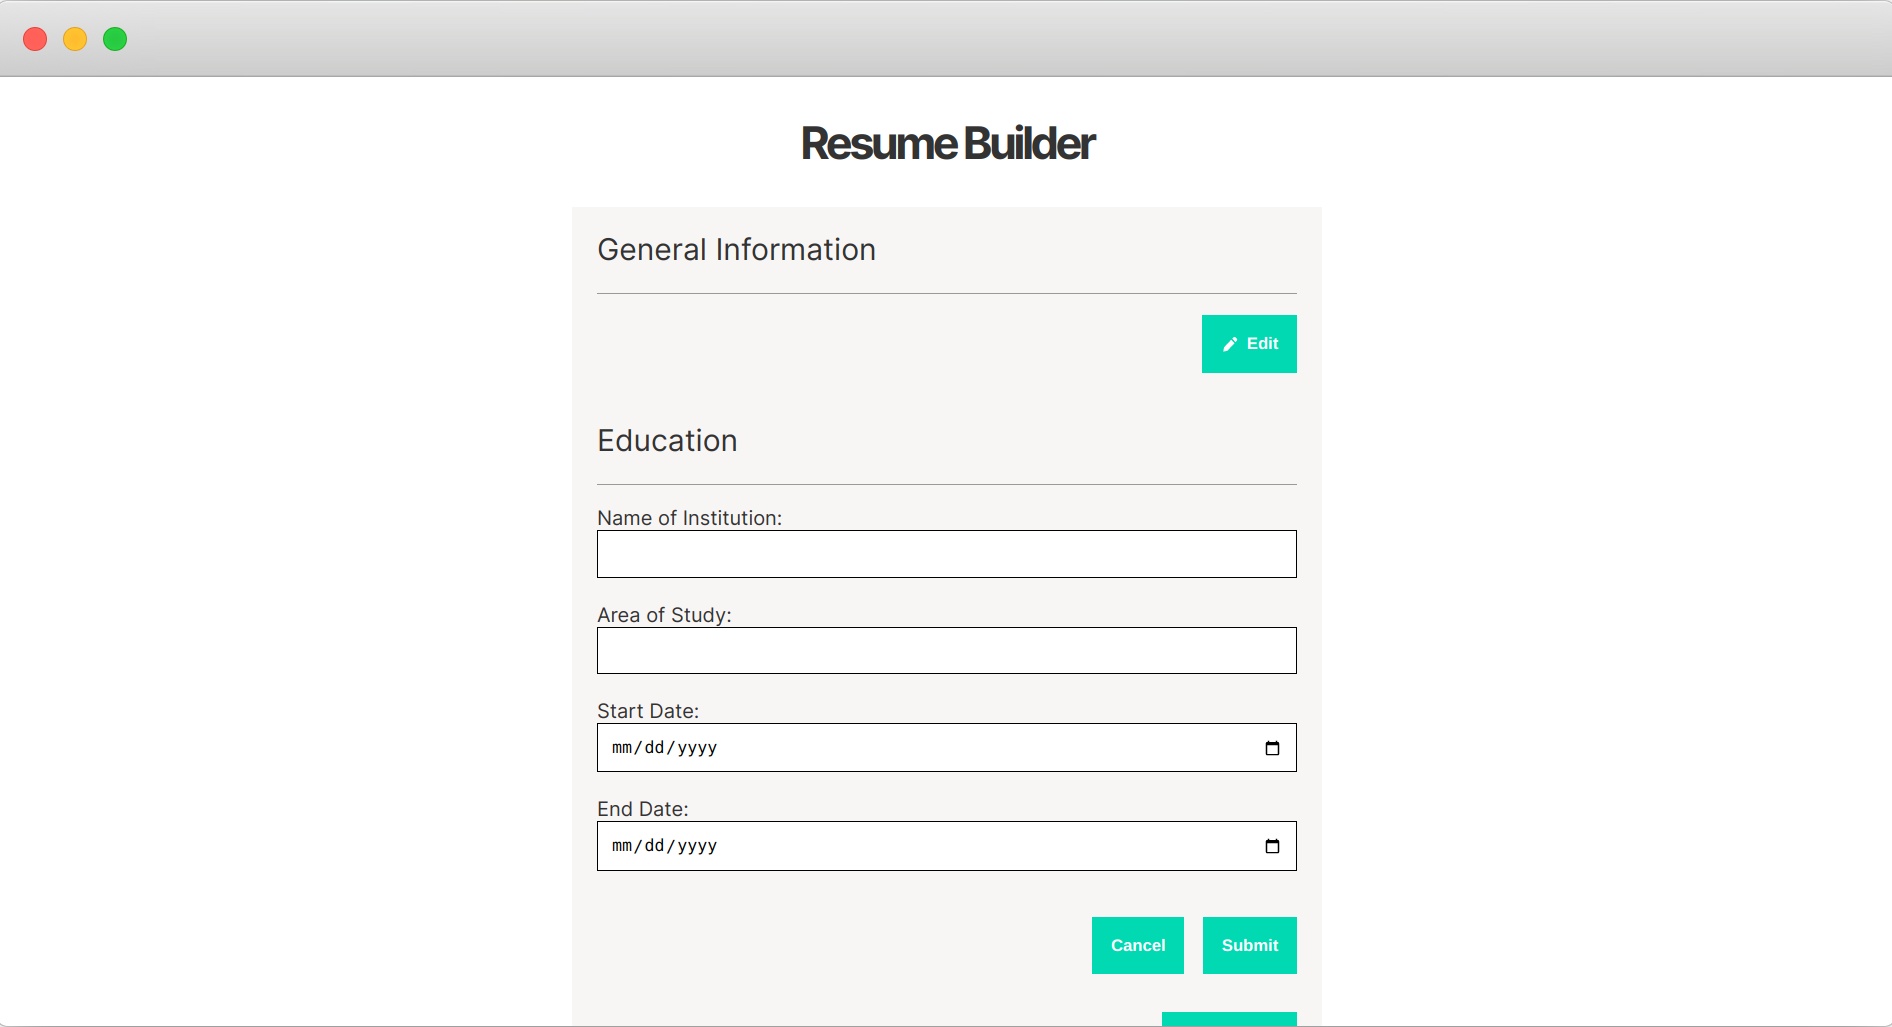 this is an image of the resume builder app